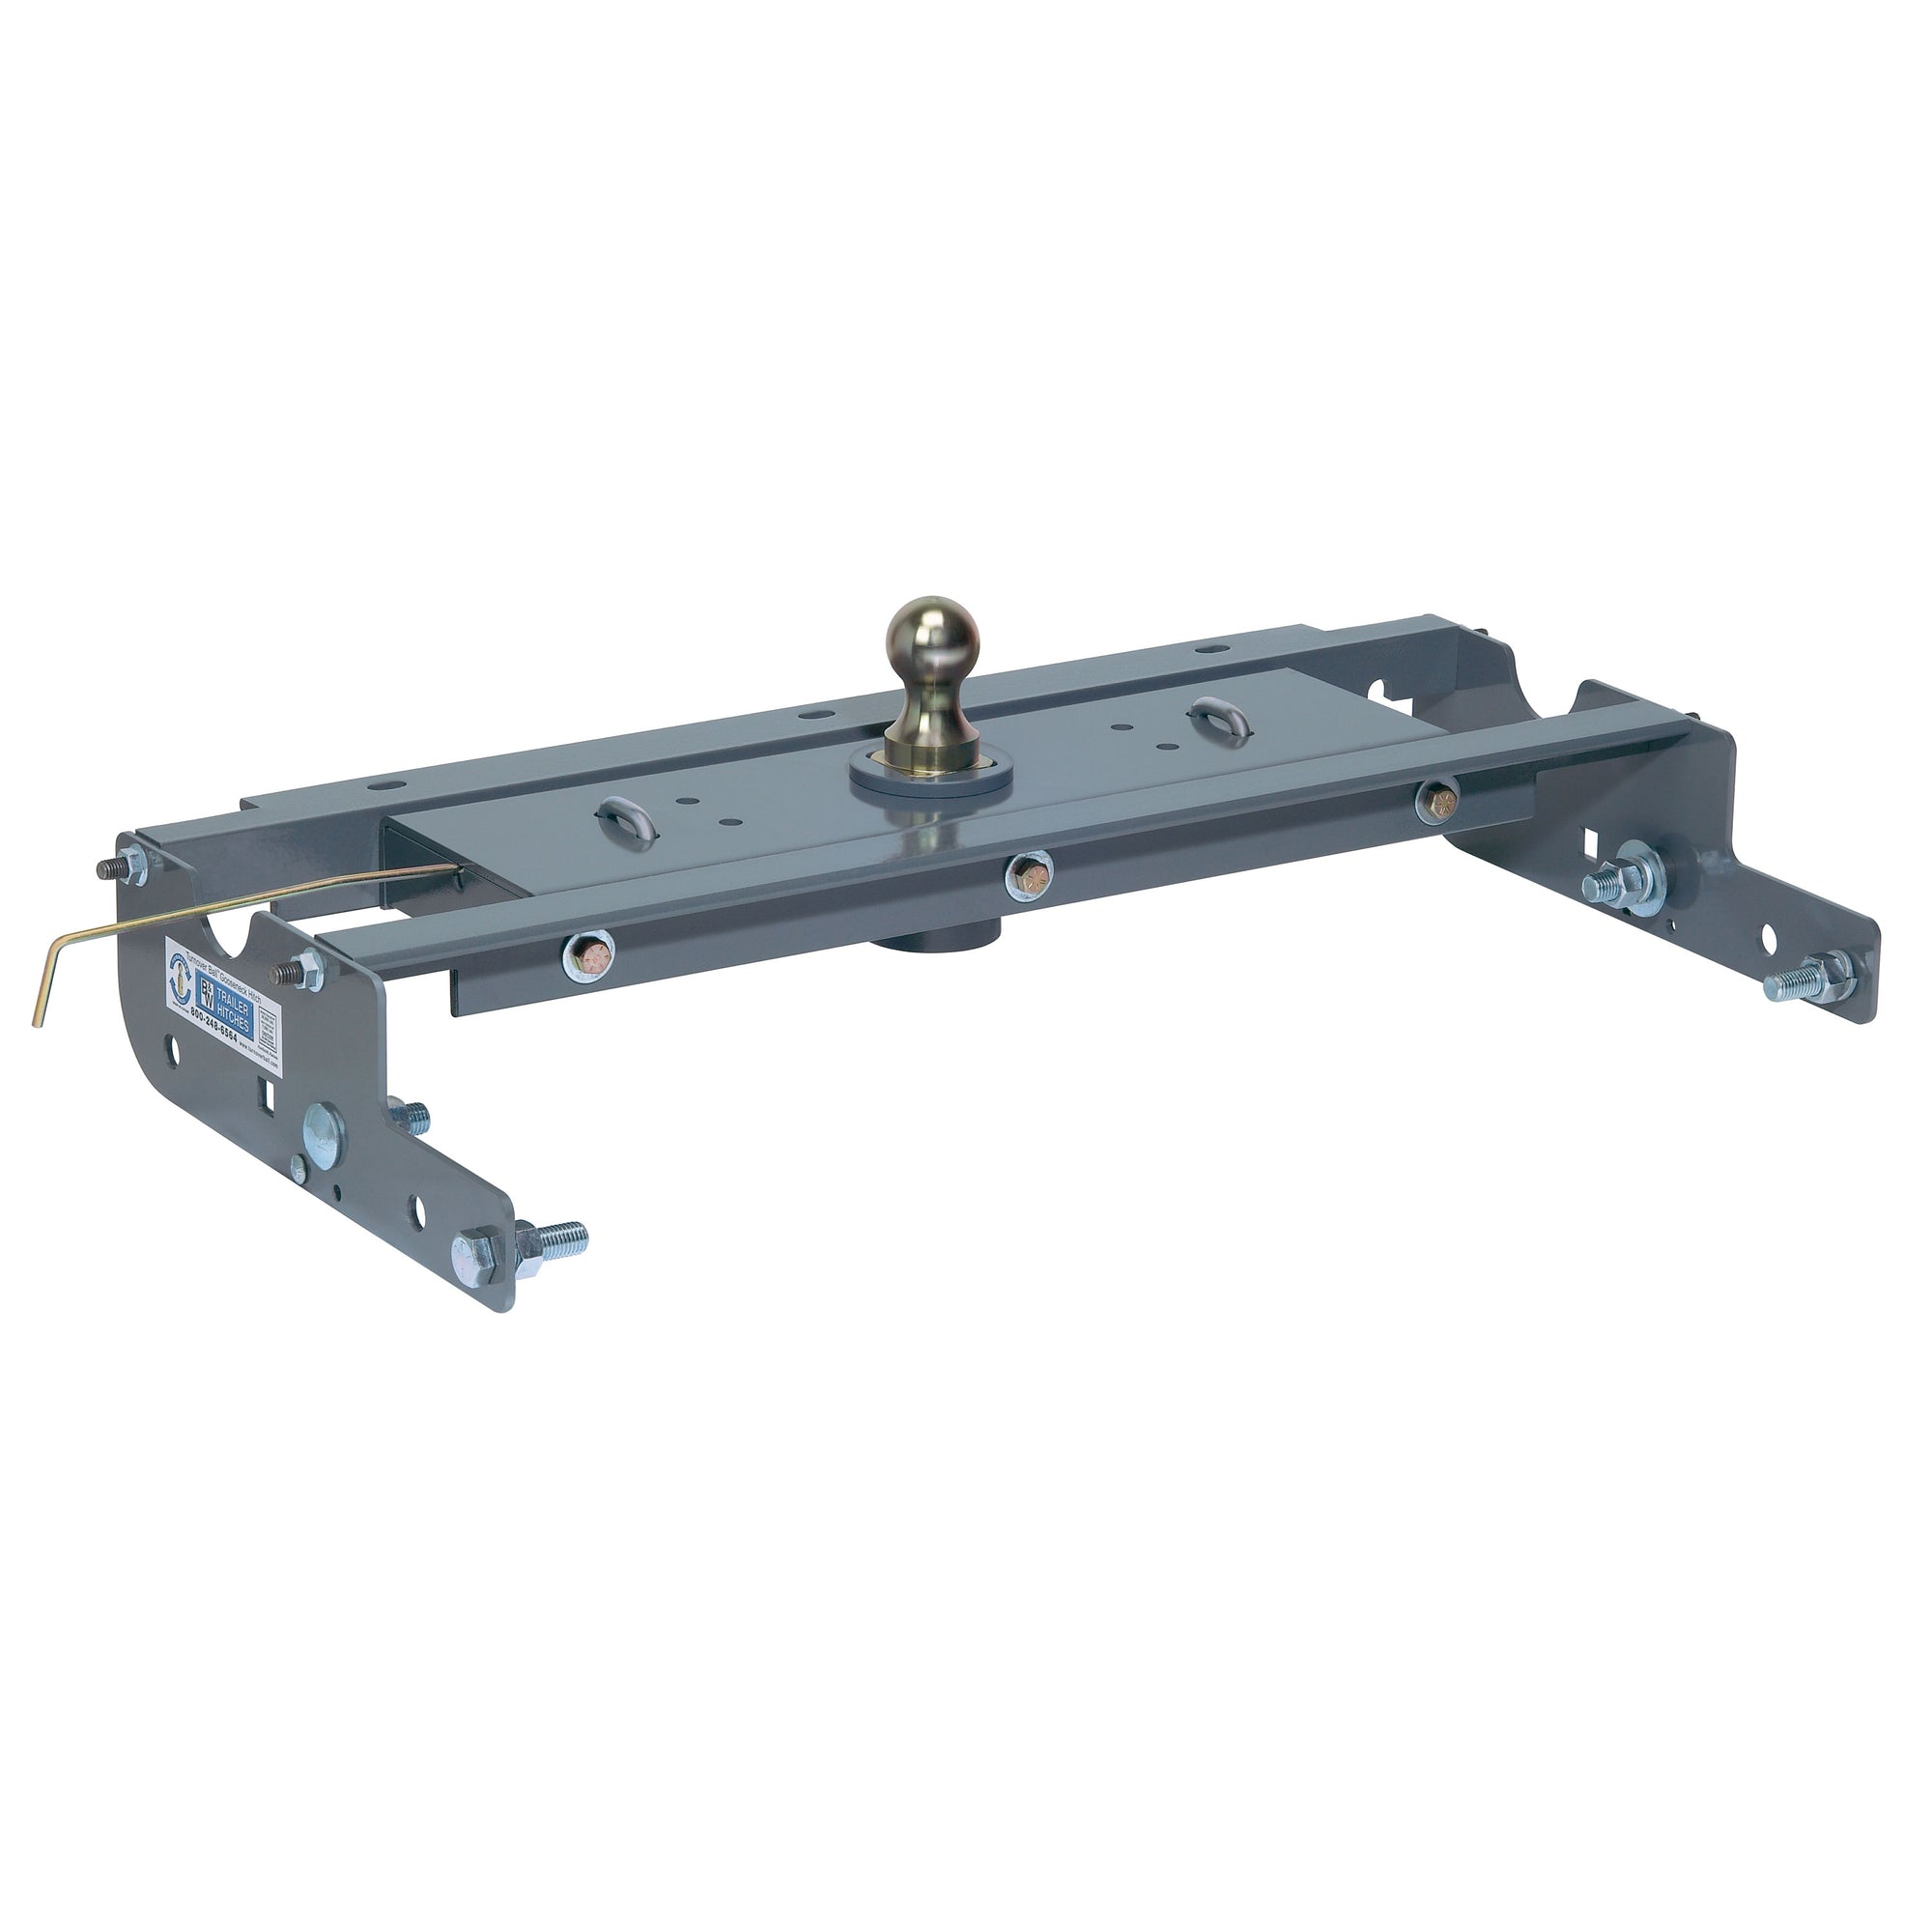 B&W Trailer Hitches GNRK1104 Turnoverball Gooseneck Hitch for Ford 1/2-Ton (2004-2014)